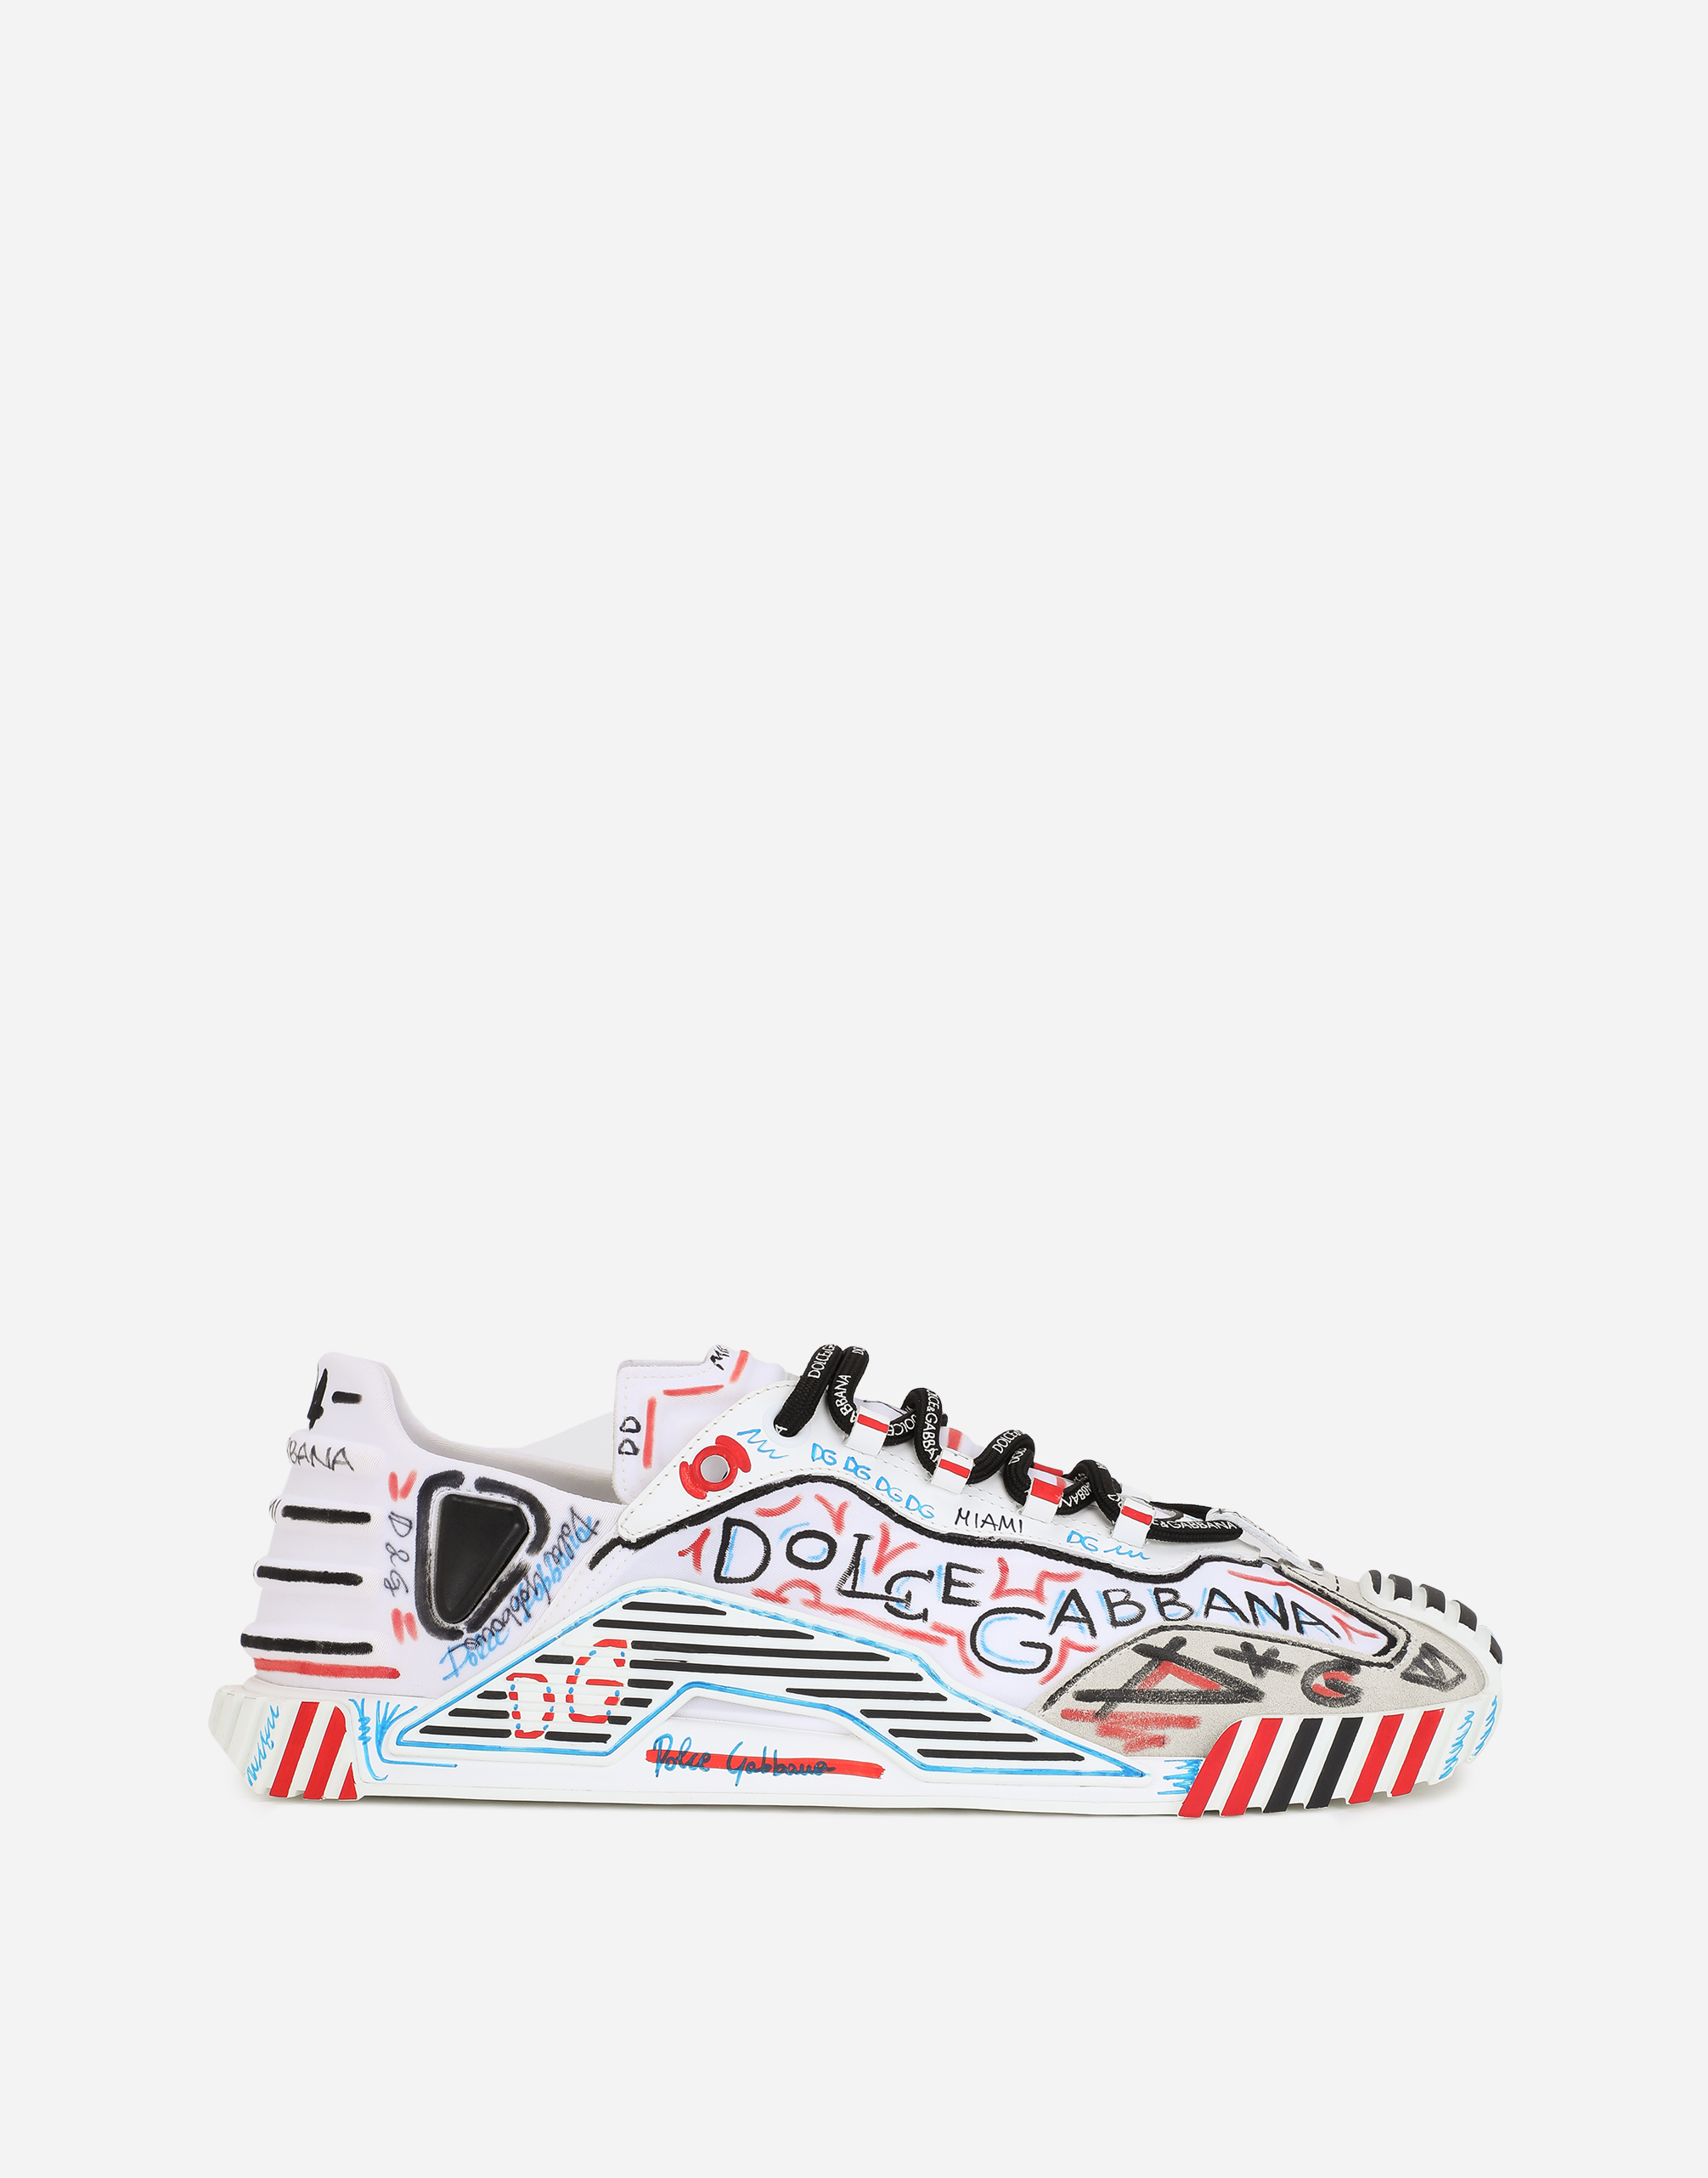 Mixed-materials Milano NS1 slip-on sneakers in Miami